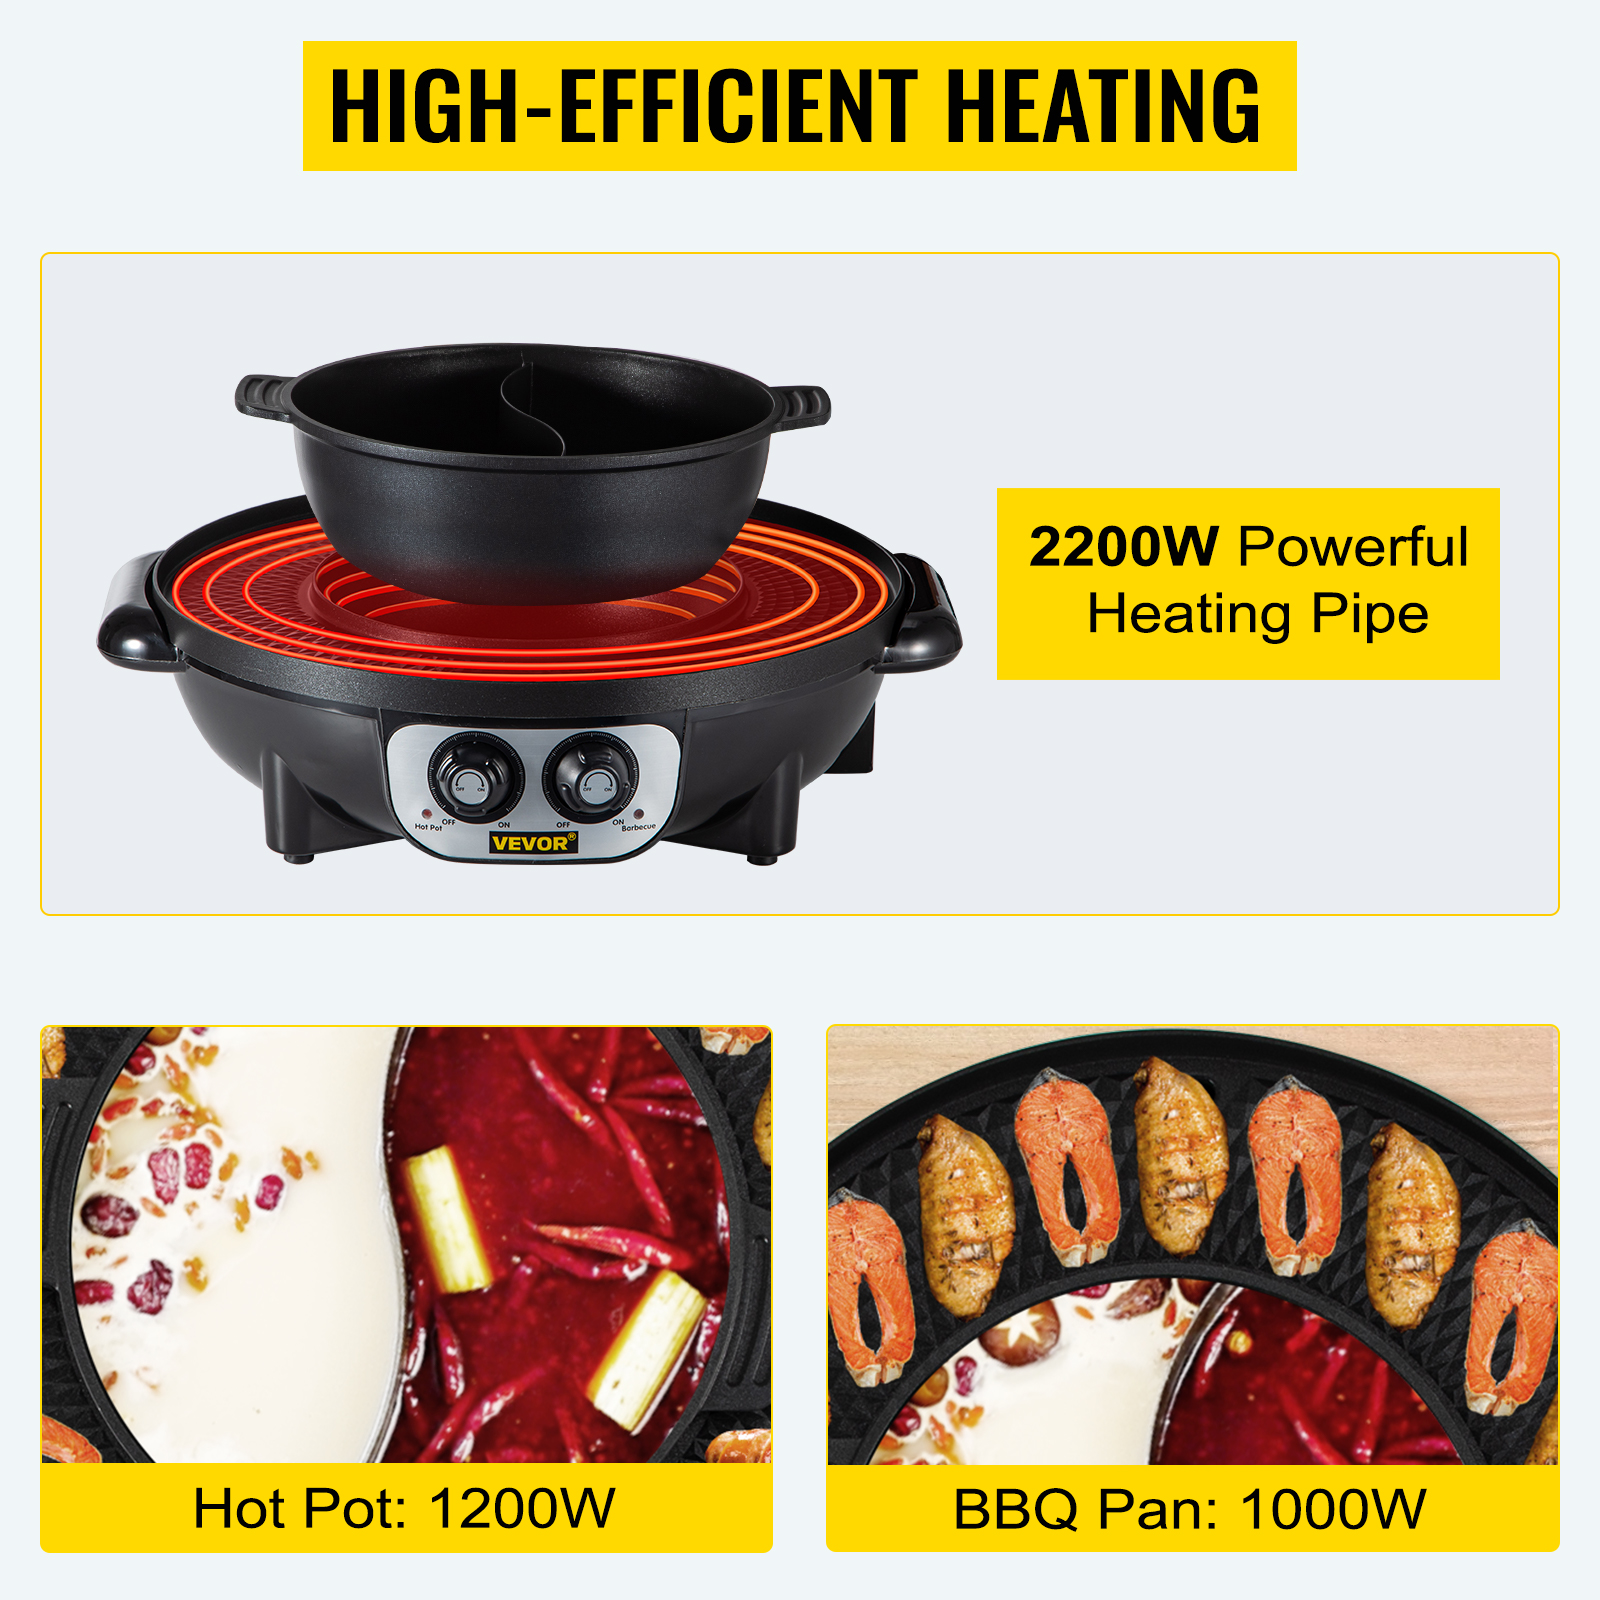 VEVOR 2 In 1 Electric Pan Hot Pot BBQ Frying Cook Grill Kitchen Barbecue  Machine 840281525065